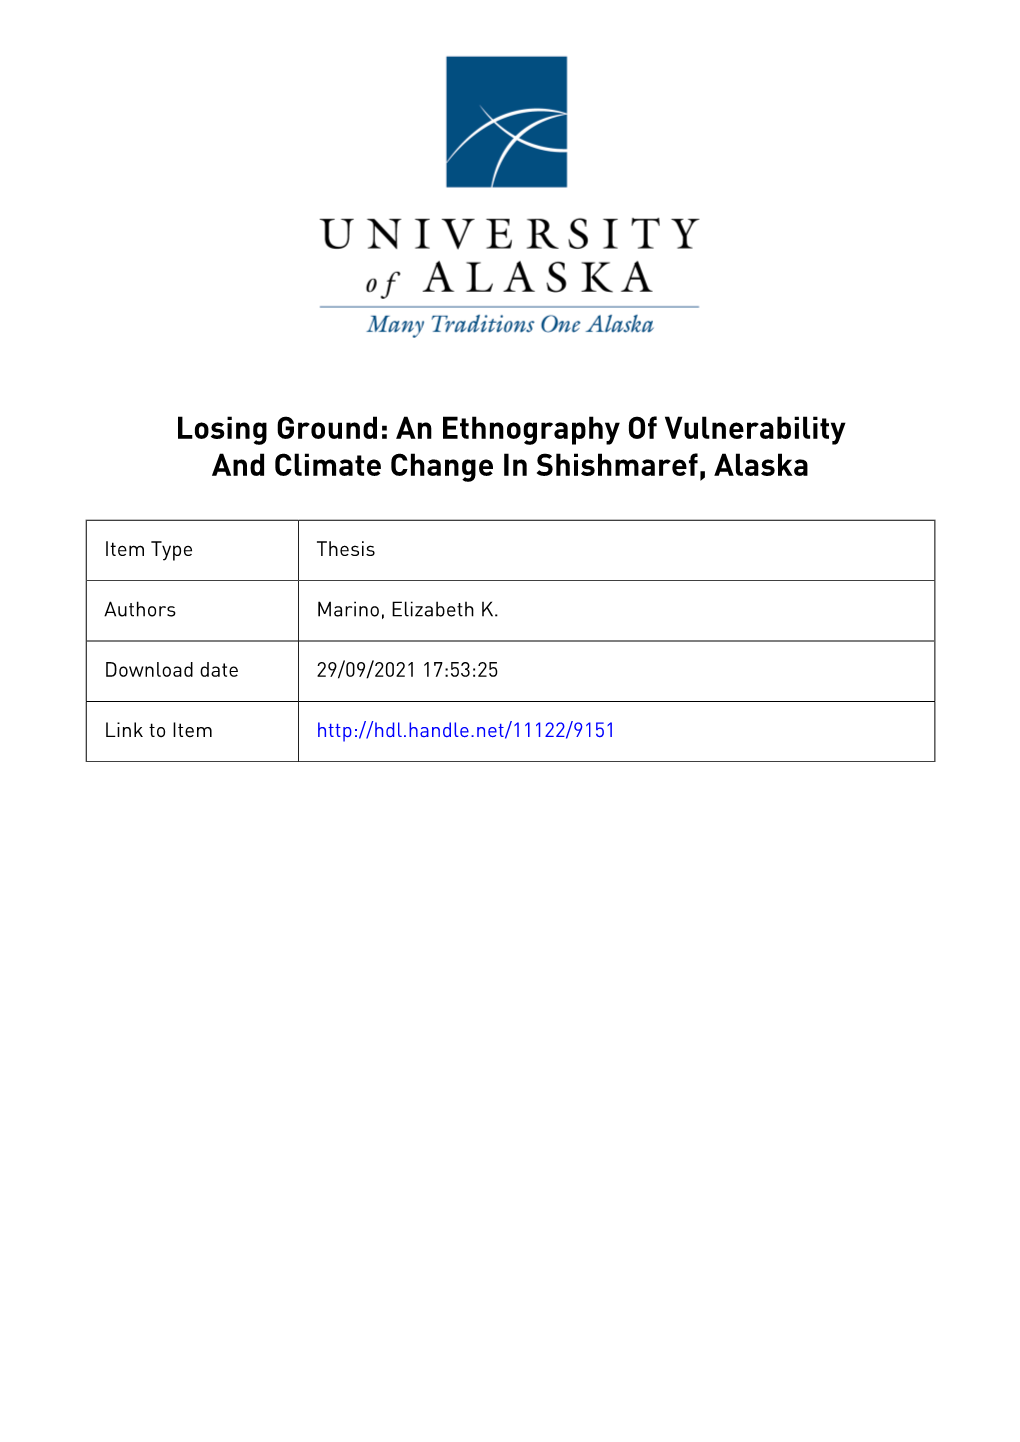 Losing Ground: an Ethnography of Vulnerability and Climate Change in Shishmaref, Alaska